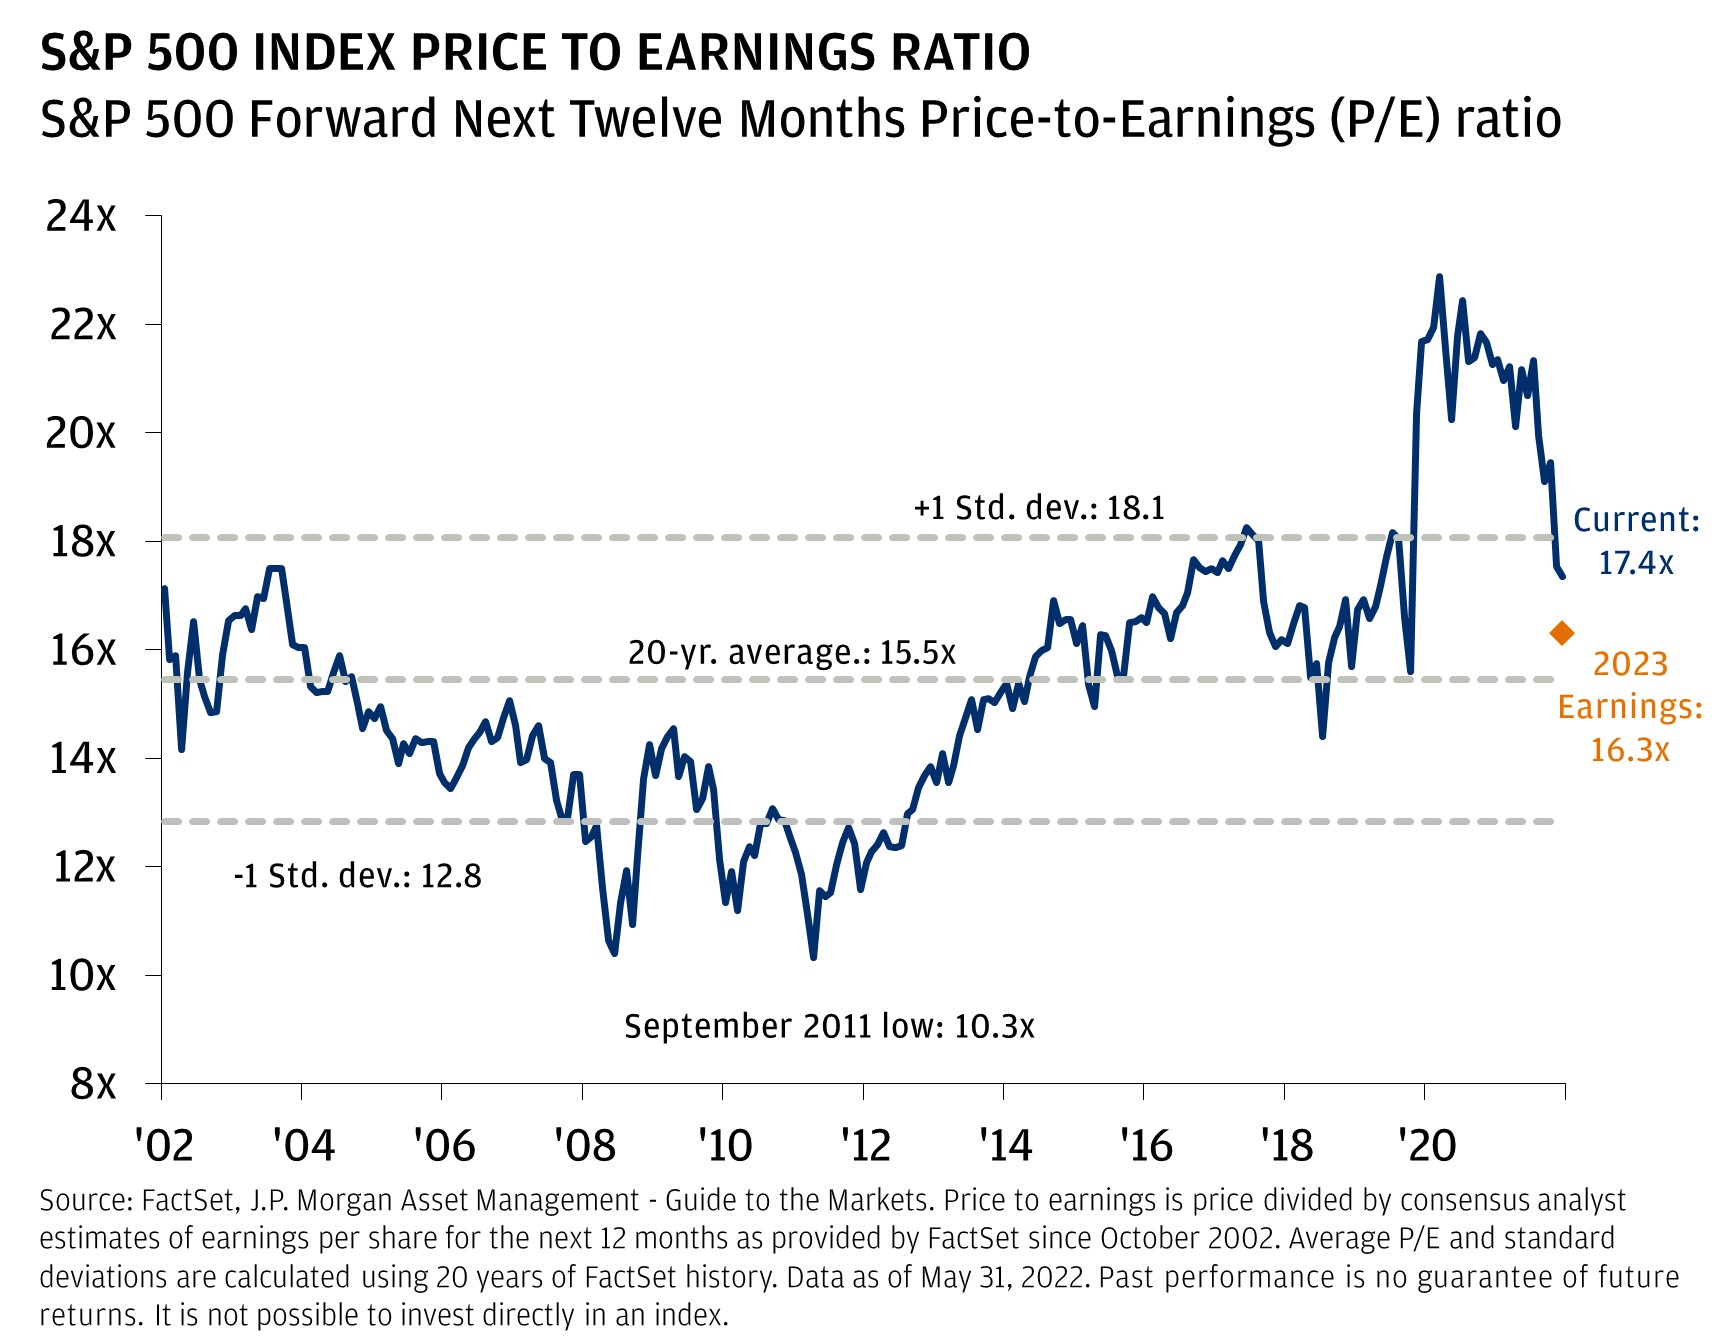 This graph shows the S&P 500 forward next twelve months price-to-earnings (P/E) ratio, from June 2002, until May 2022.